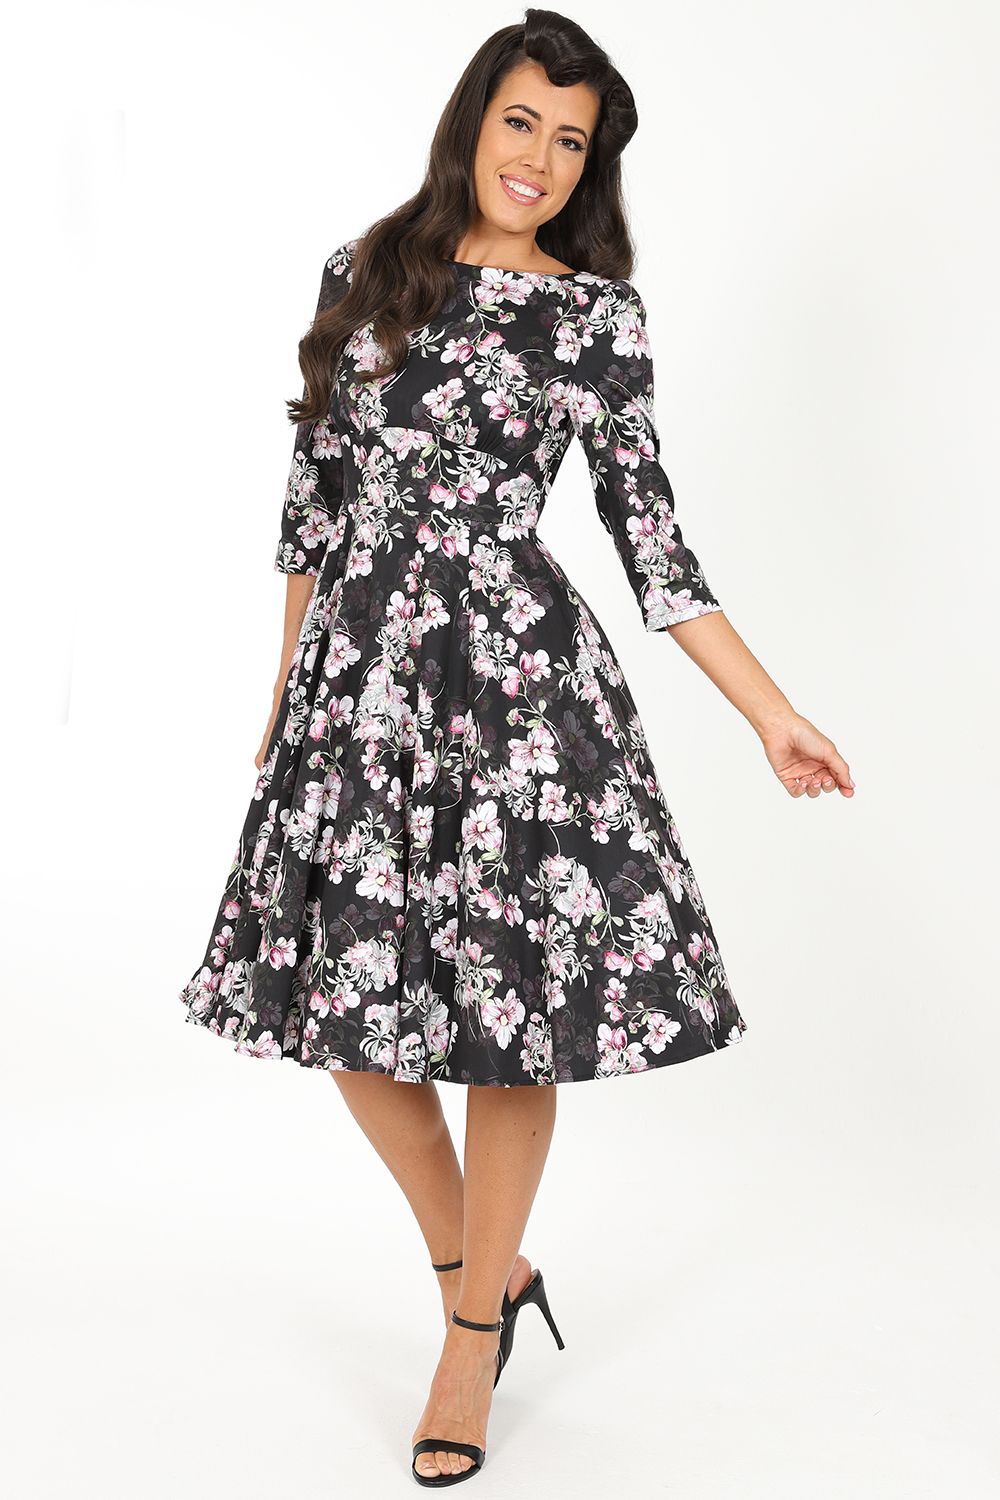 Kate Floral Swing Dress in Black/Pink - Hearts & Roses London